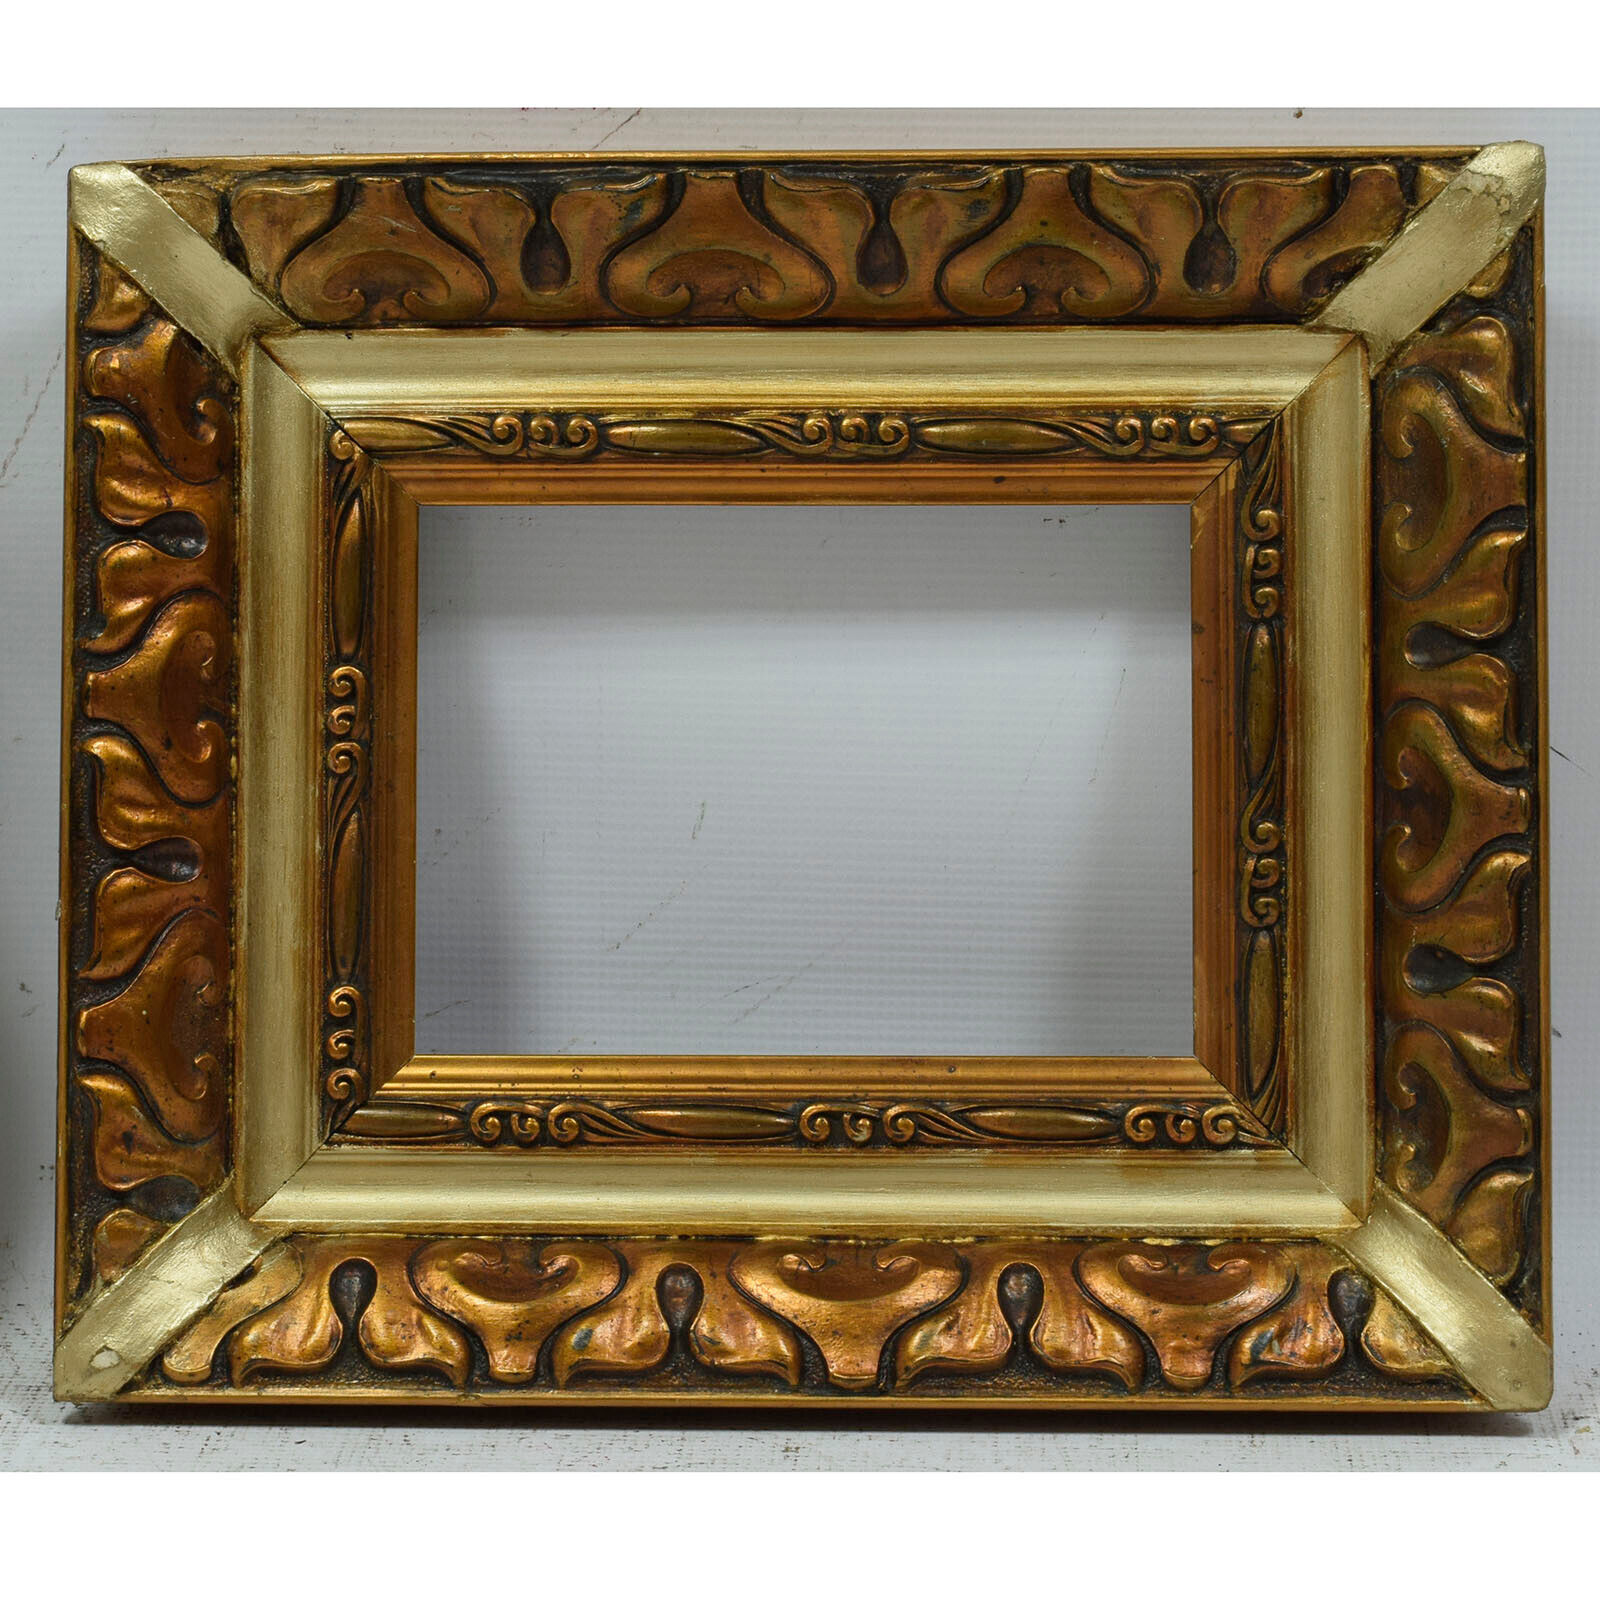 1937 Old wooden frame original condition Internal: 8,2x6,1 in